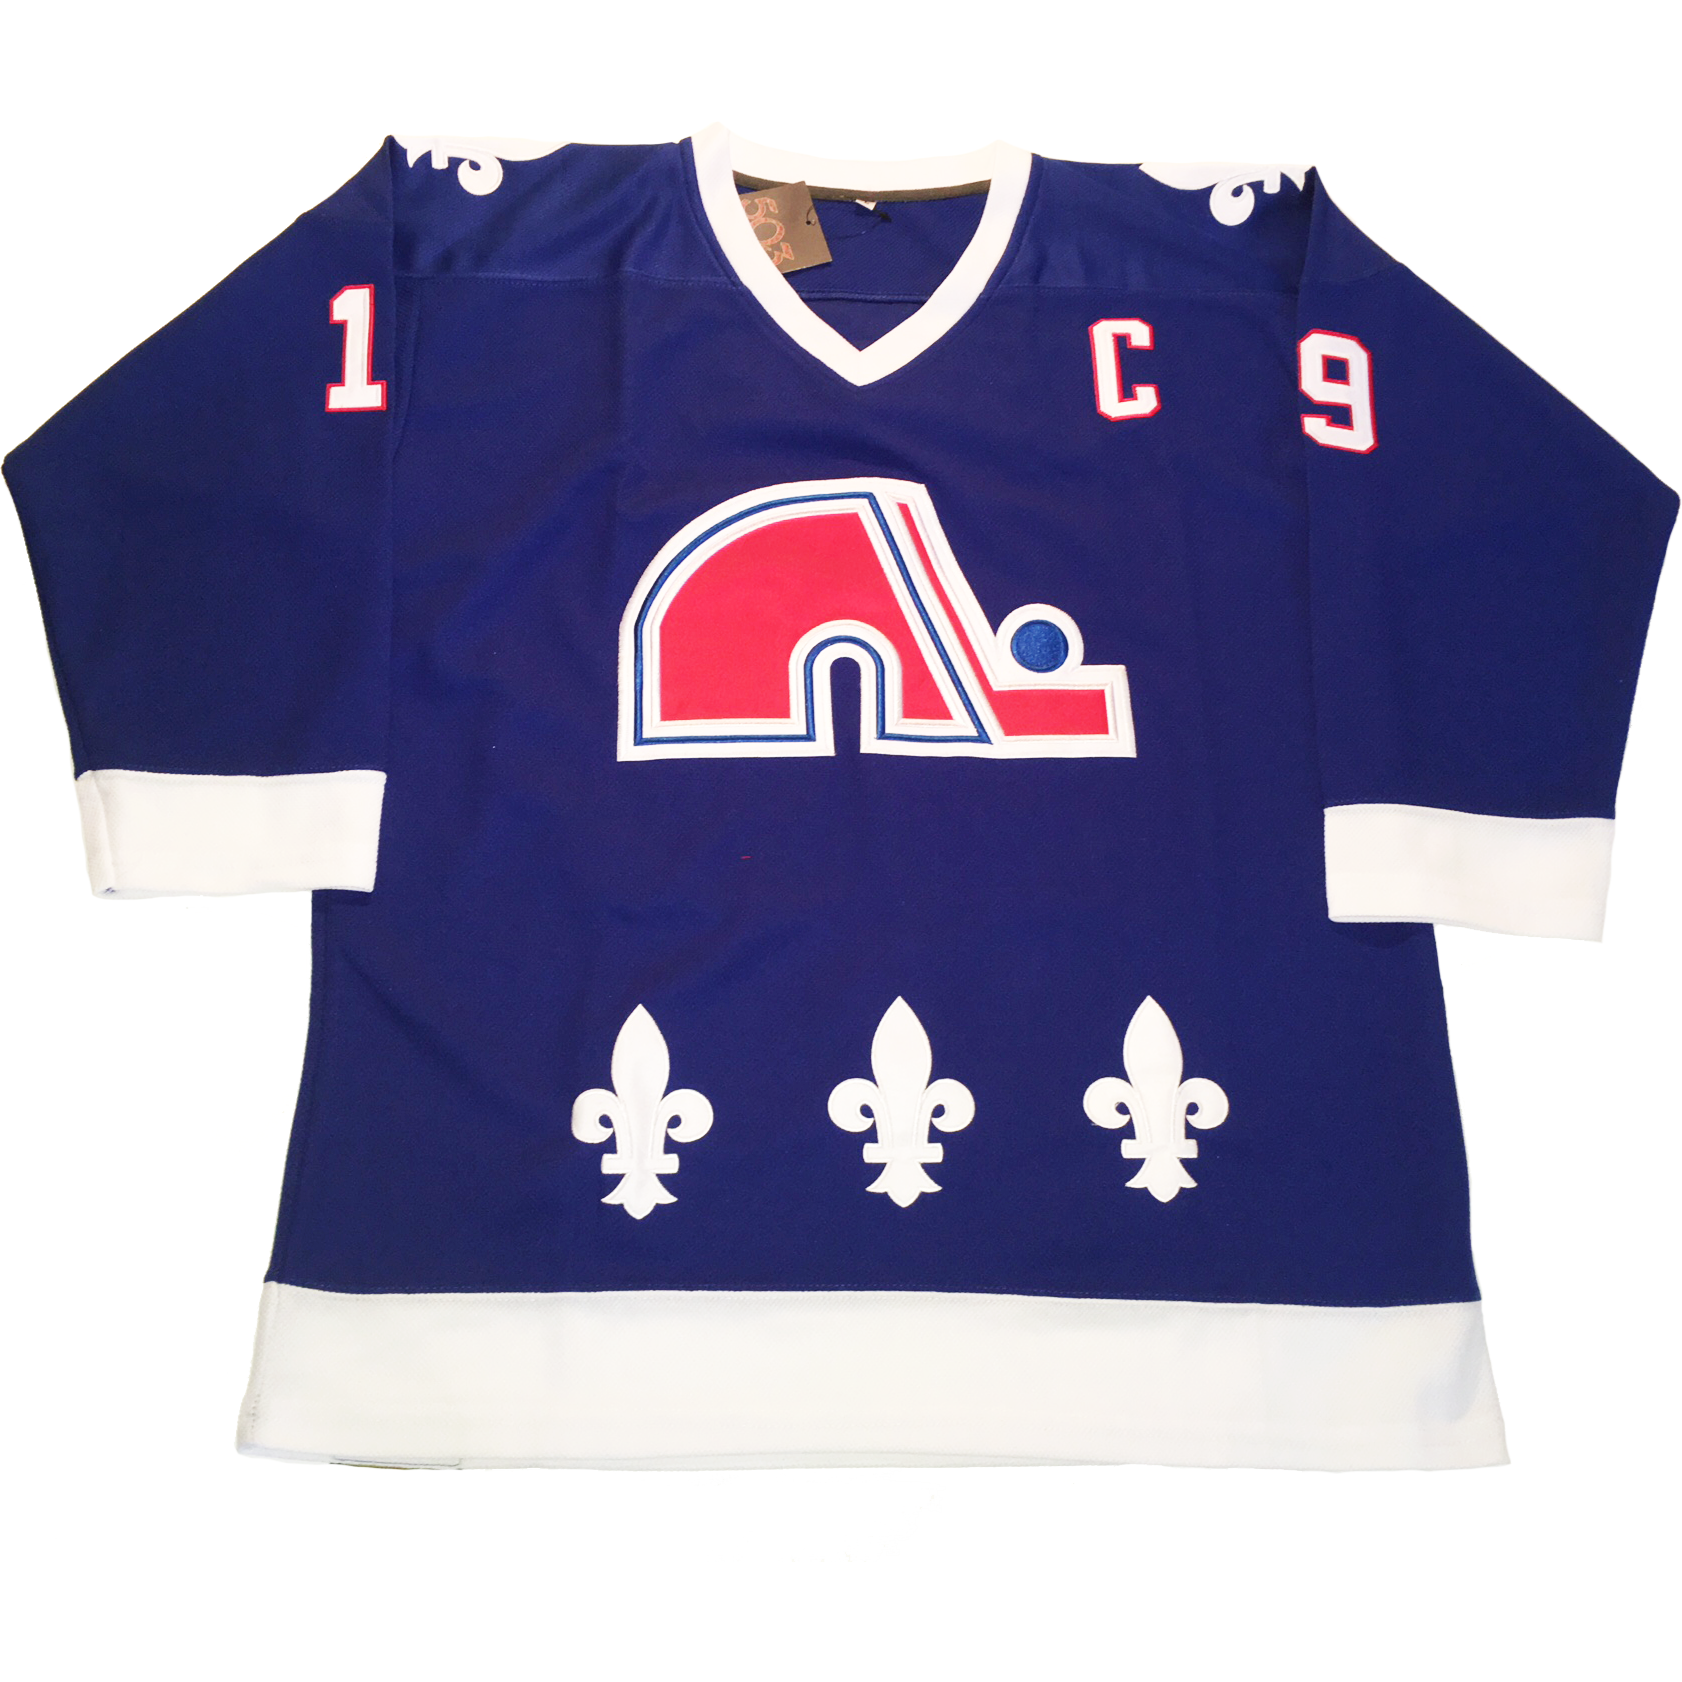 Another couple of custom jerseys for the Quebec Nordiques and the